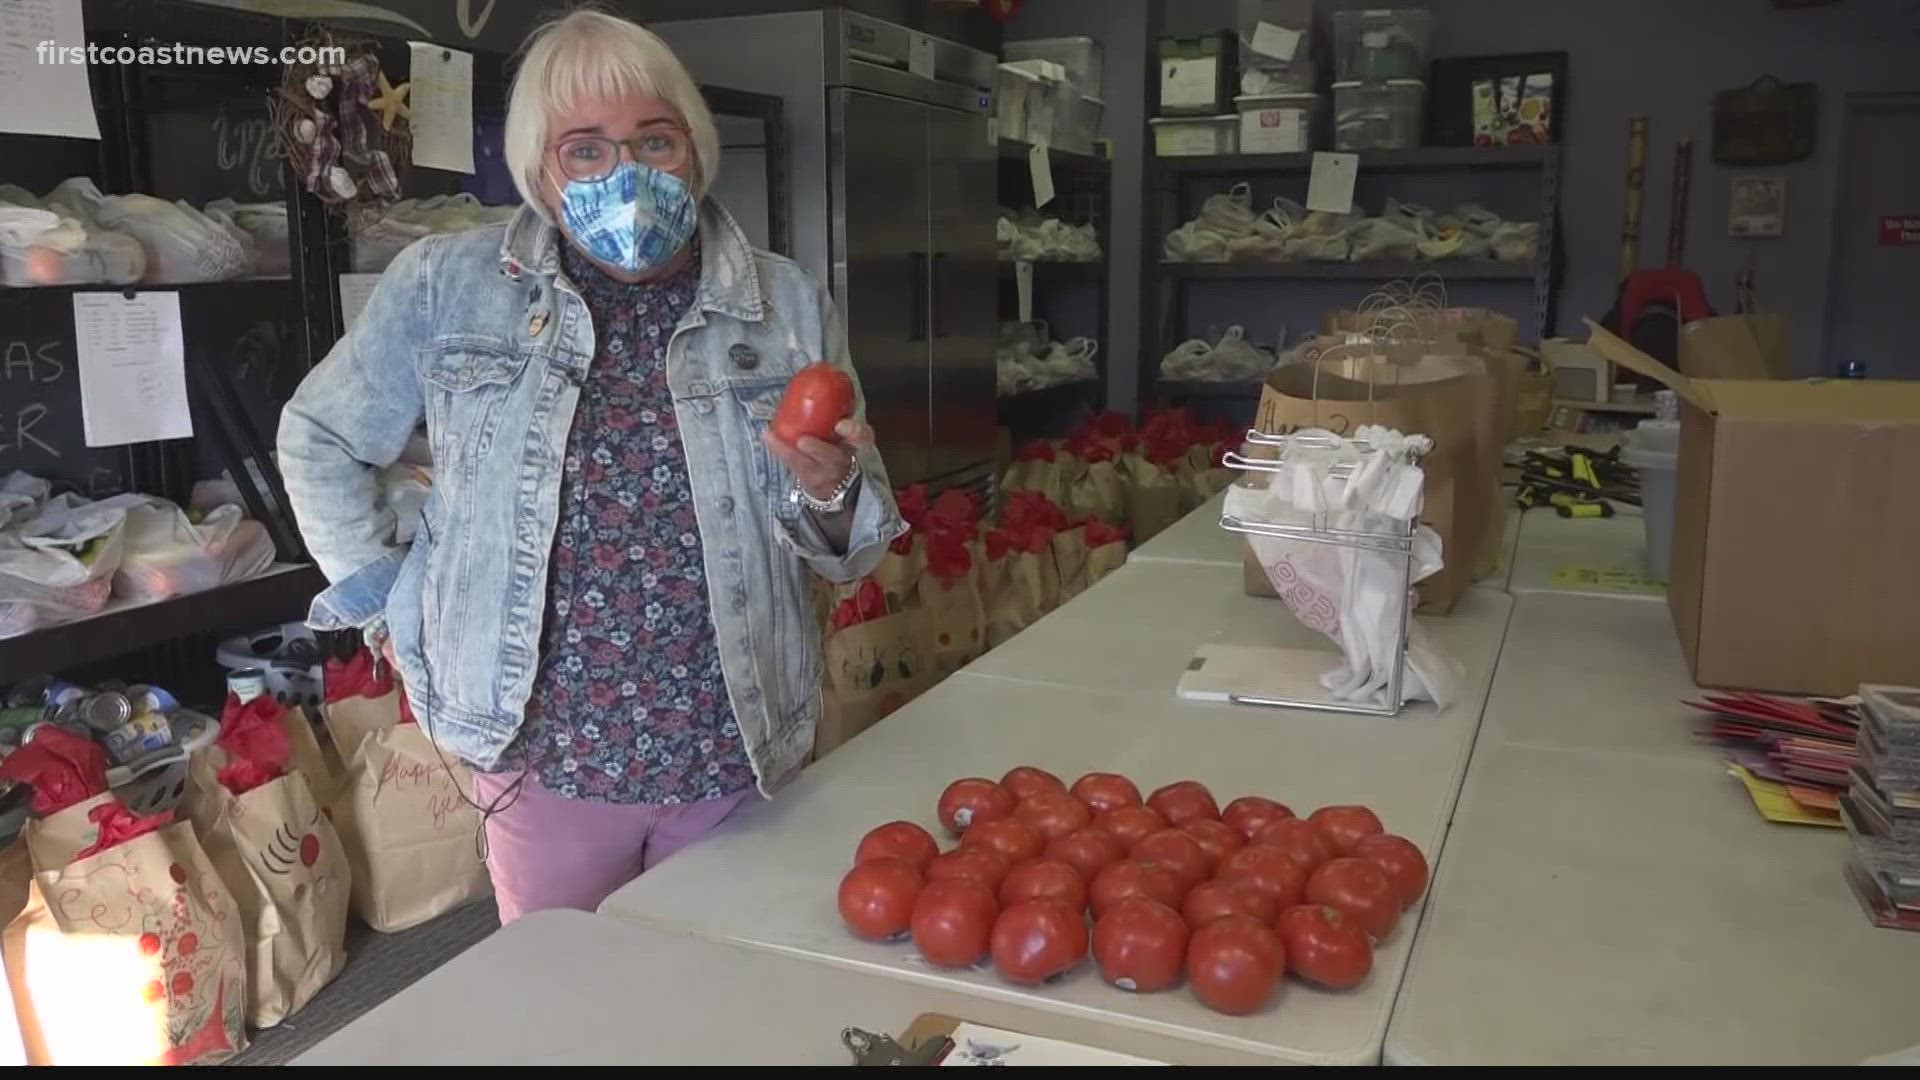 Tomatoes are a hot commodity at Pie in the Sky. They deliver groceries to 450 seniors in St. Johns County.